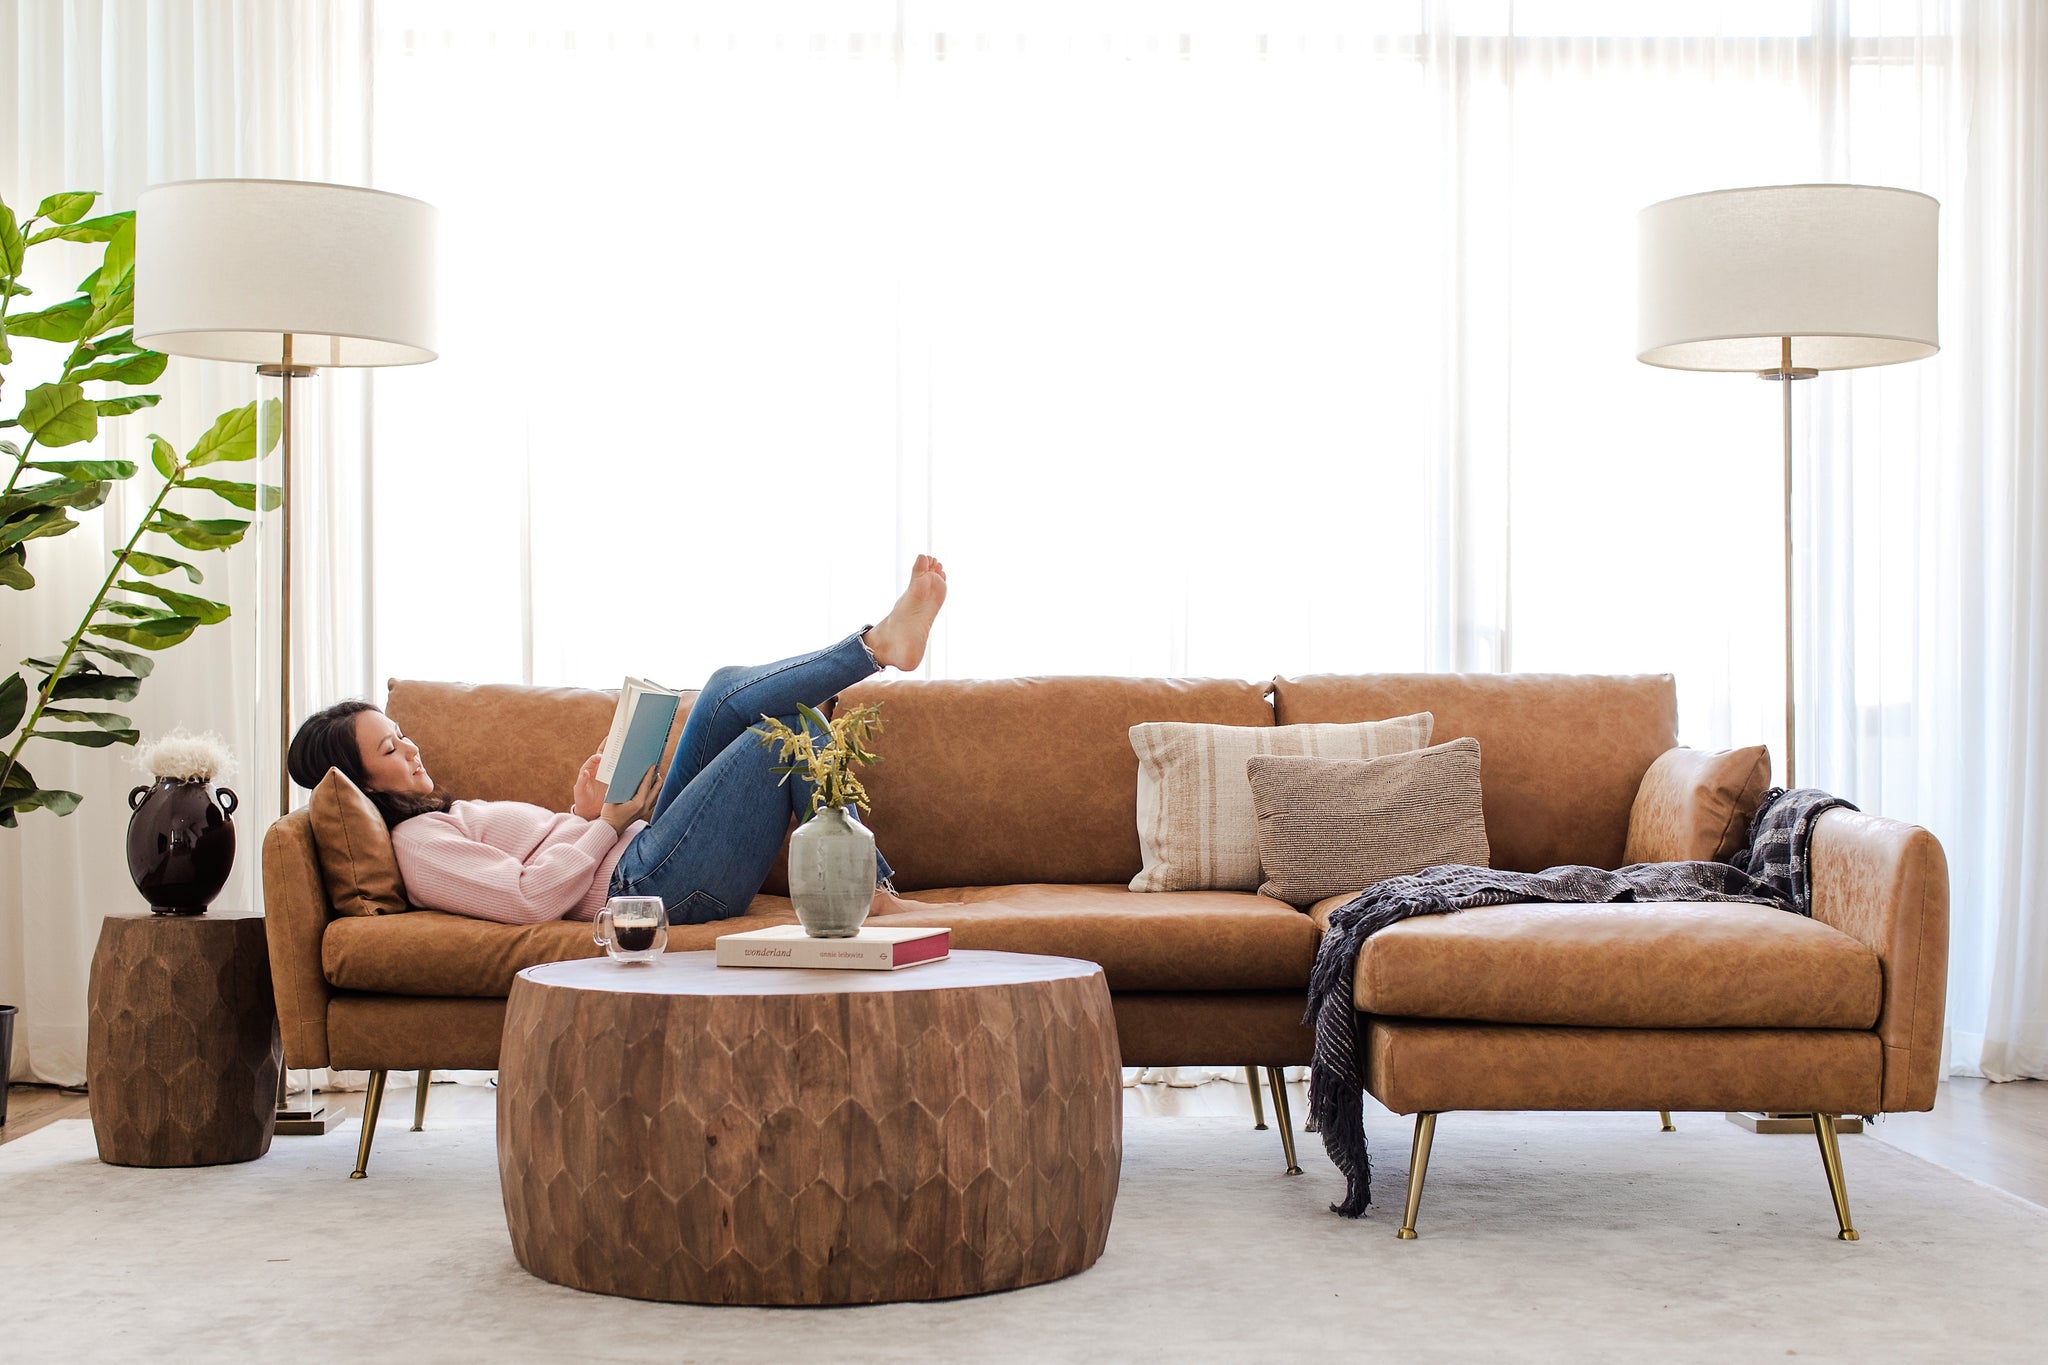 park sectional sofa shown in distressed vegan leather with gold legs right facing